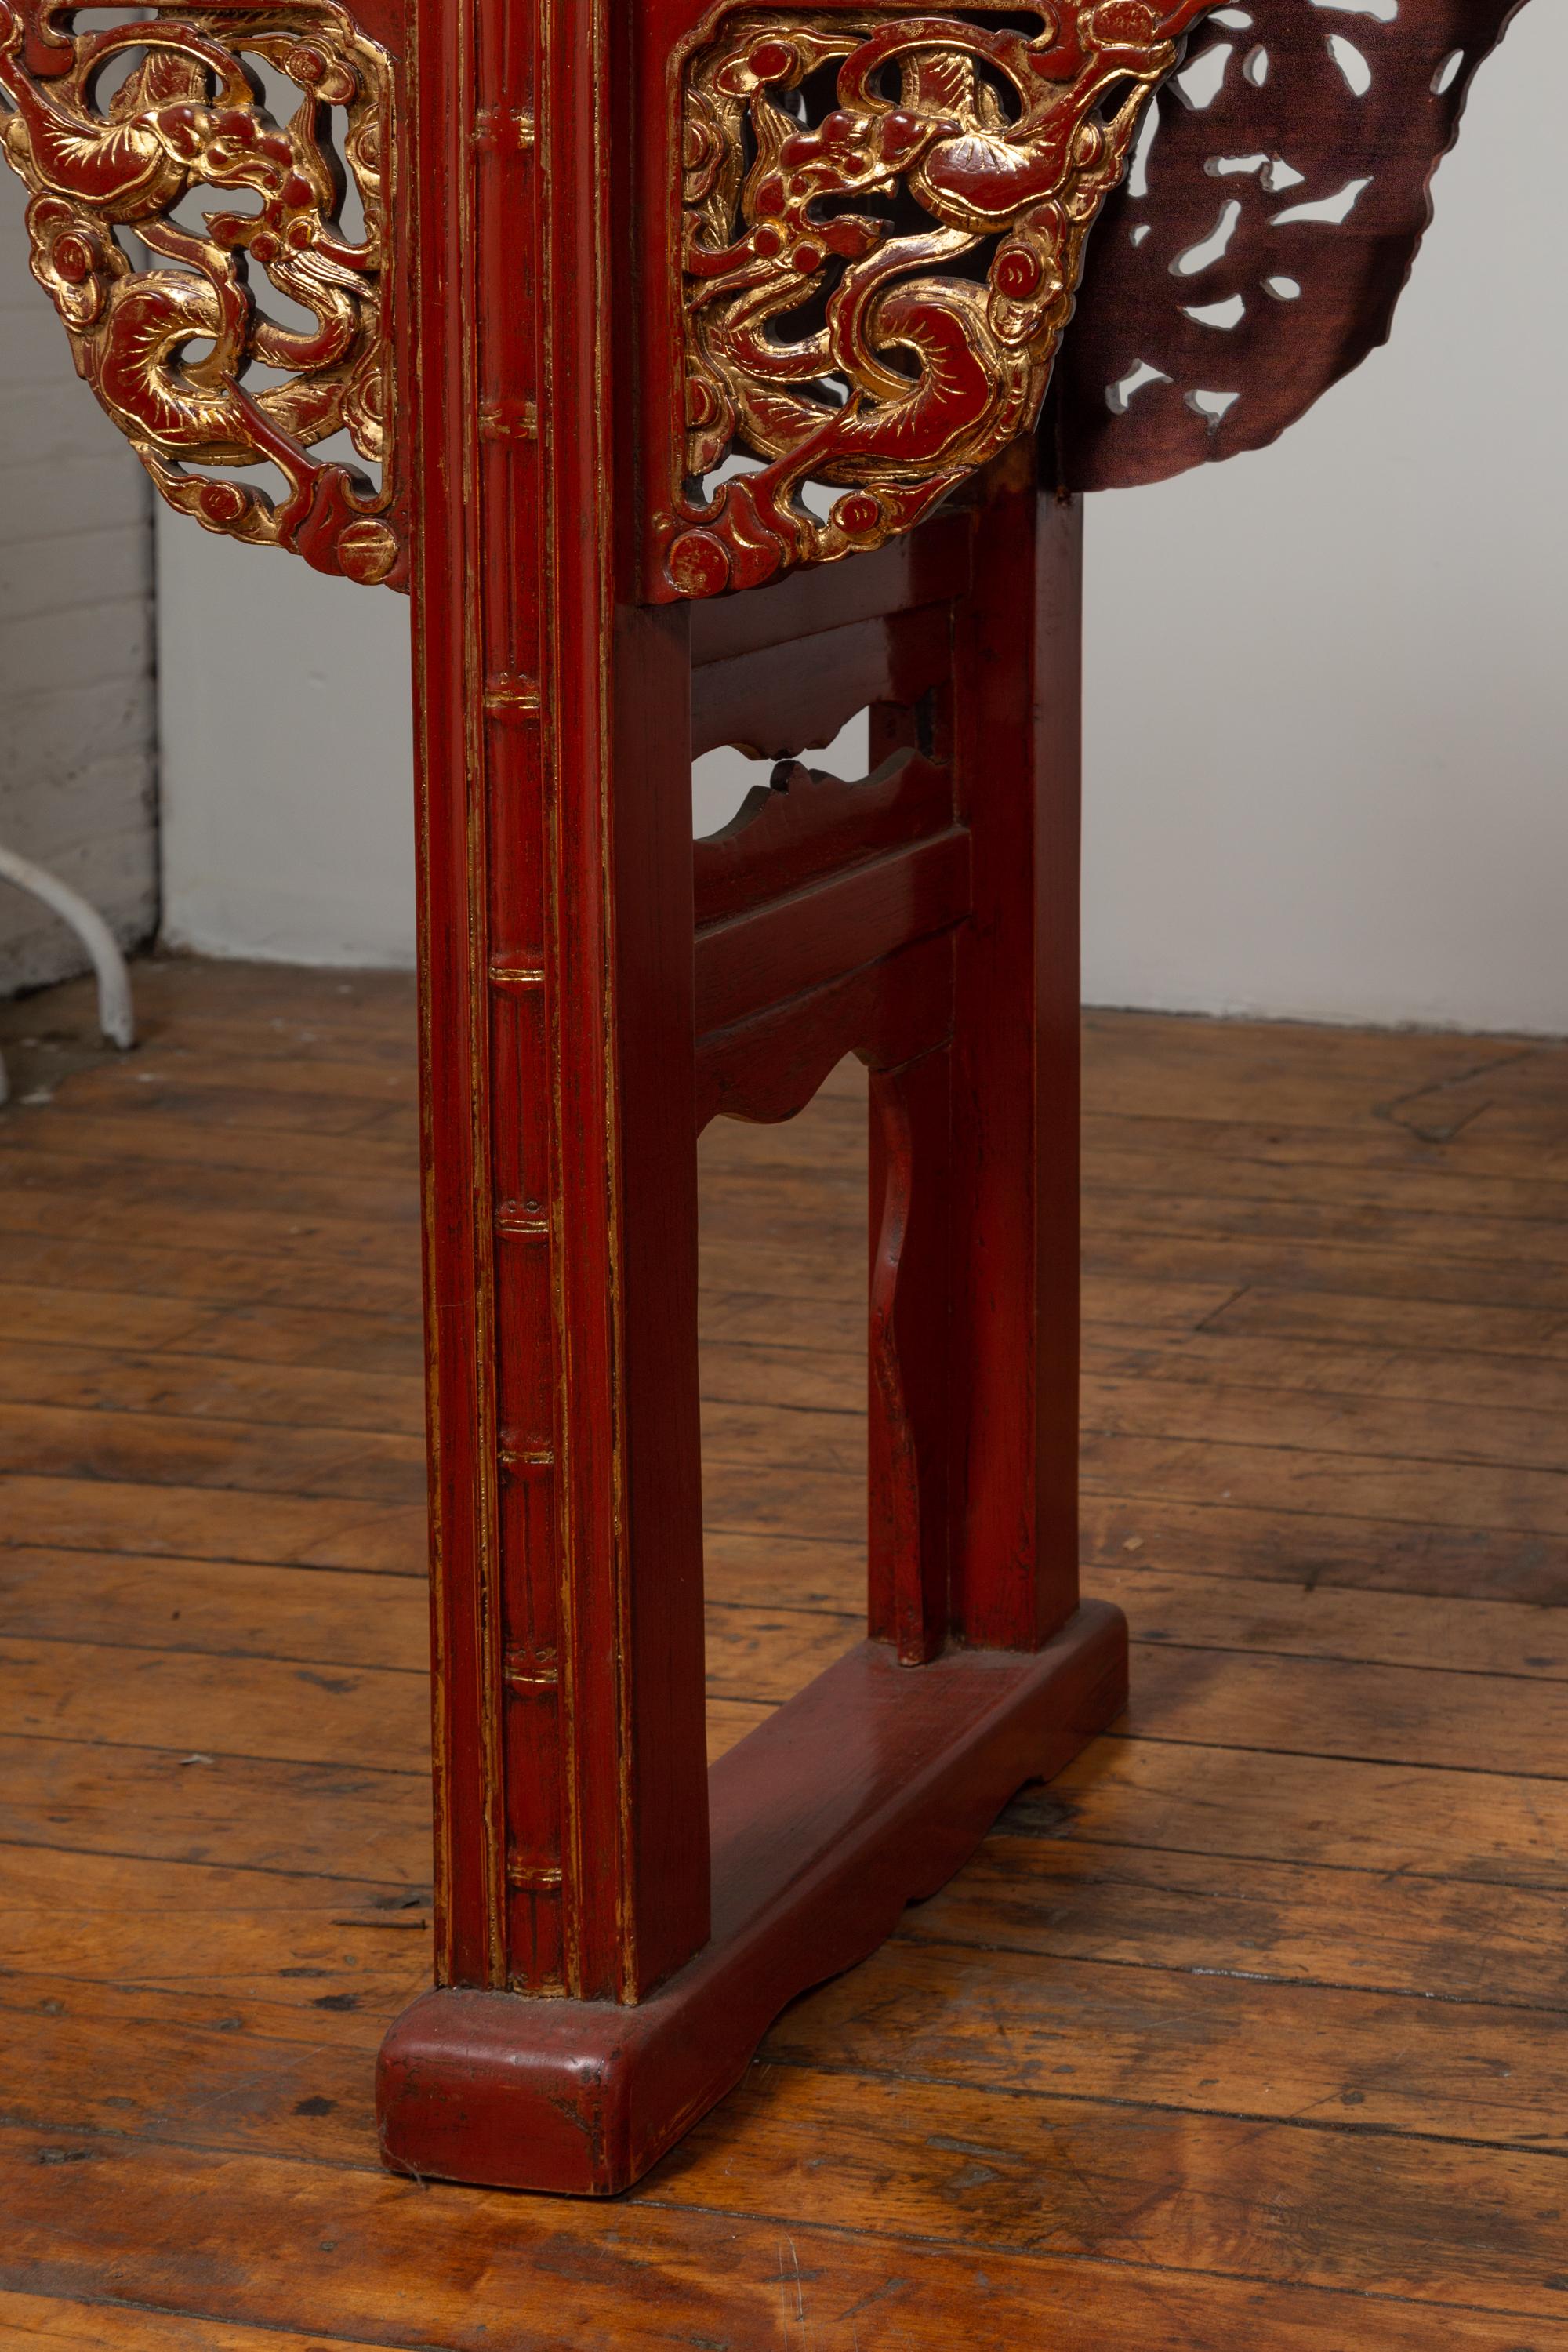 Antique Chinese Red Lacquered Console Table with Gilt Accents and Carved Apron In Good Condition For Sale In Yonkers, NY